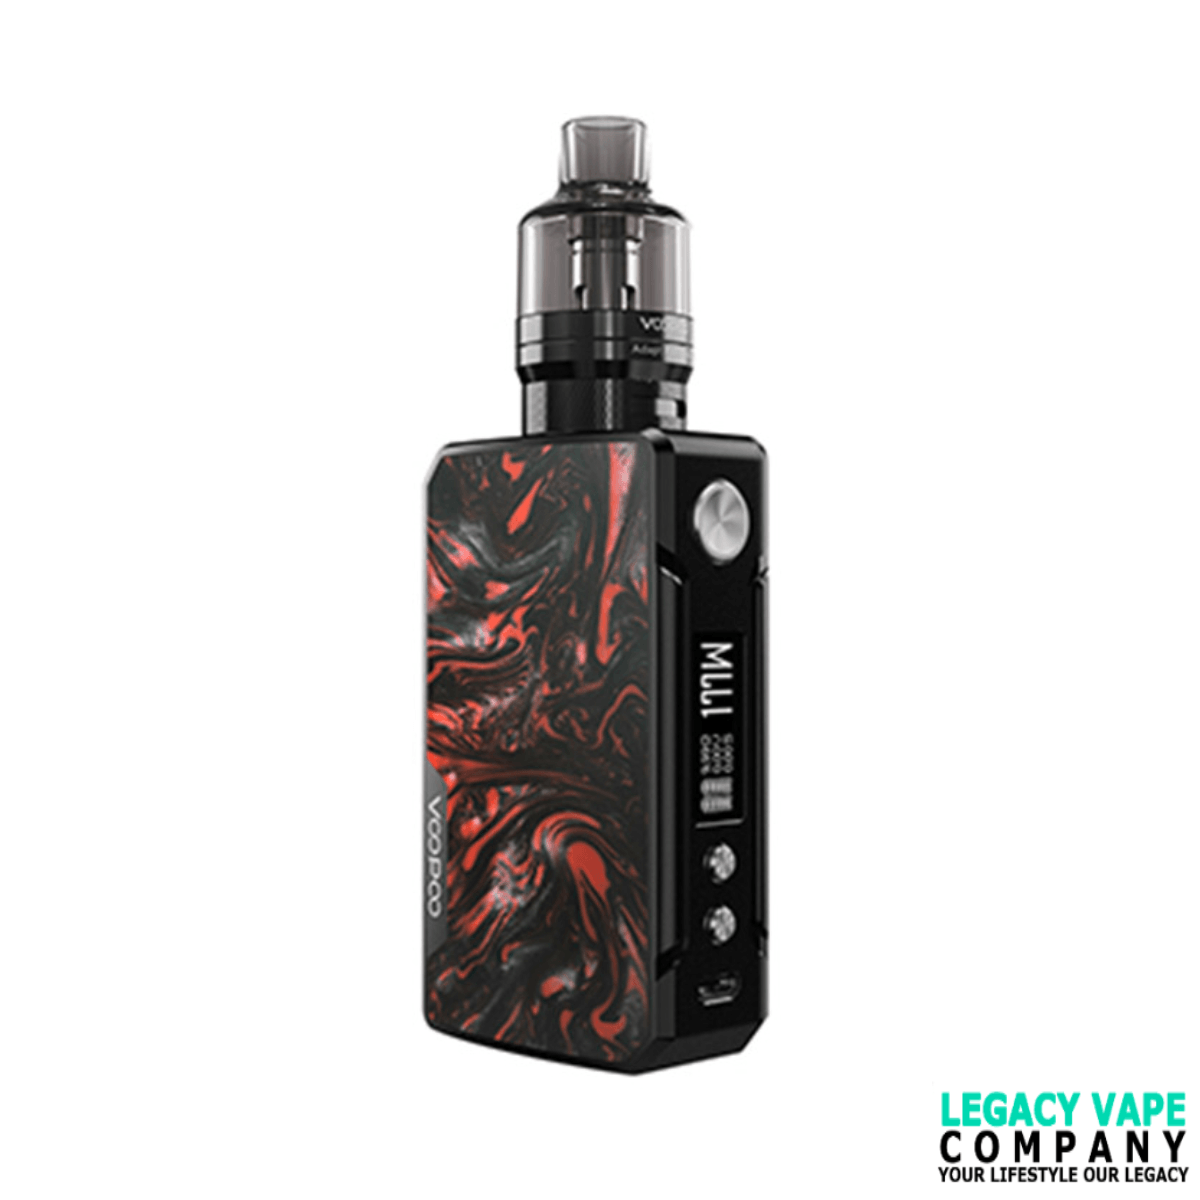 Voopoo Drag 2 Mod Kit With PnP Pod Tank Atomizer 4.5ml (Refresh Edition) Black and red